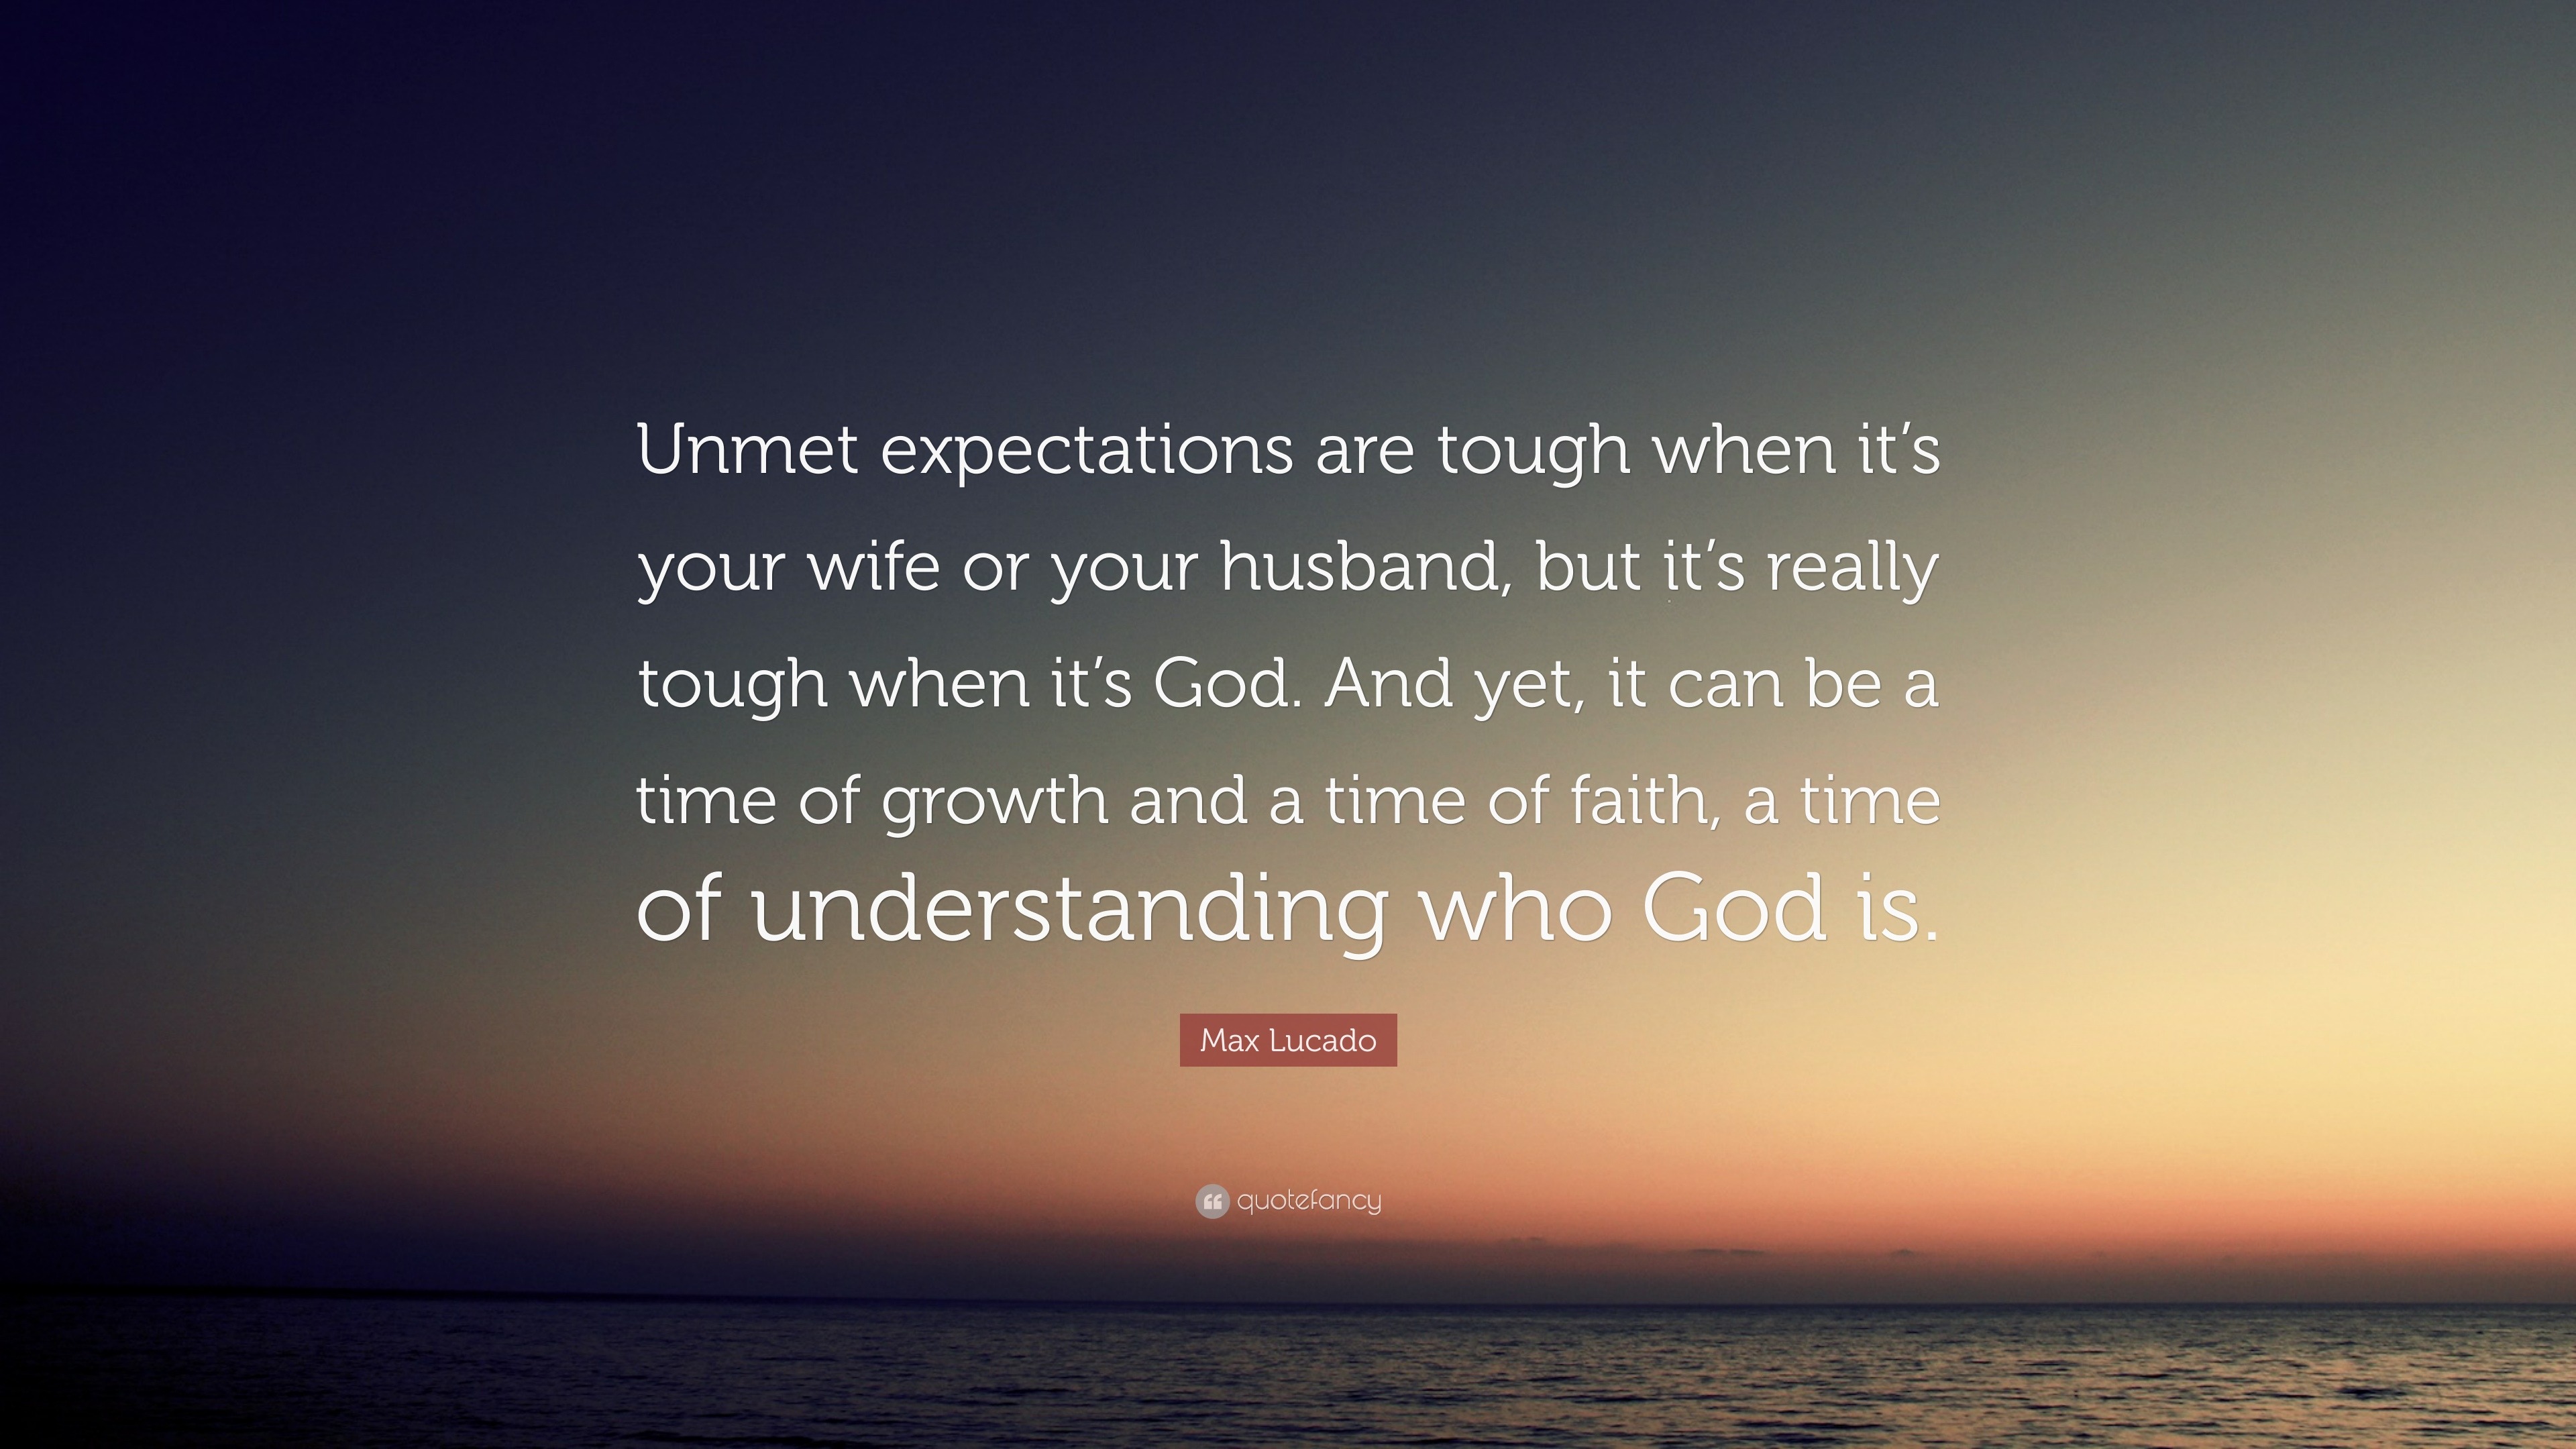 Max Lucado Quote: “Unmet expectations are tough when it's your wife or your  husband